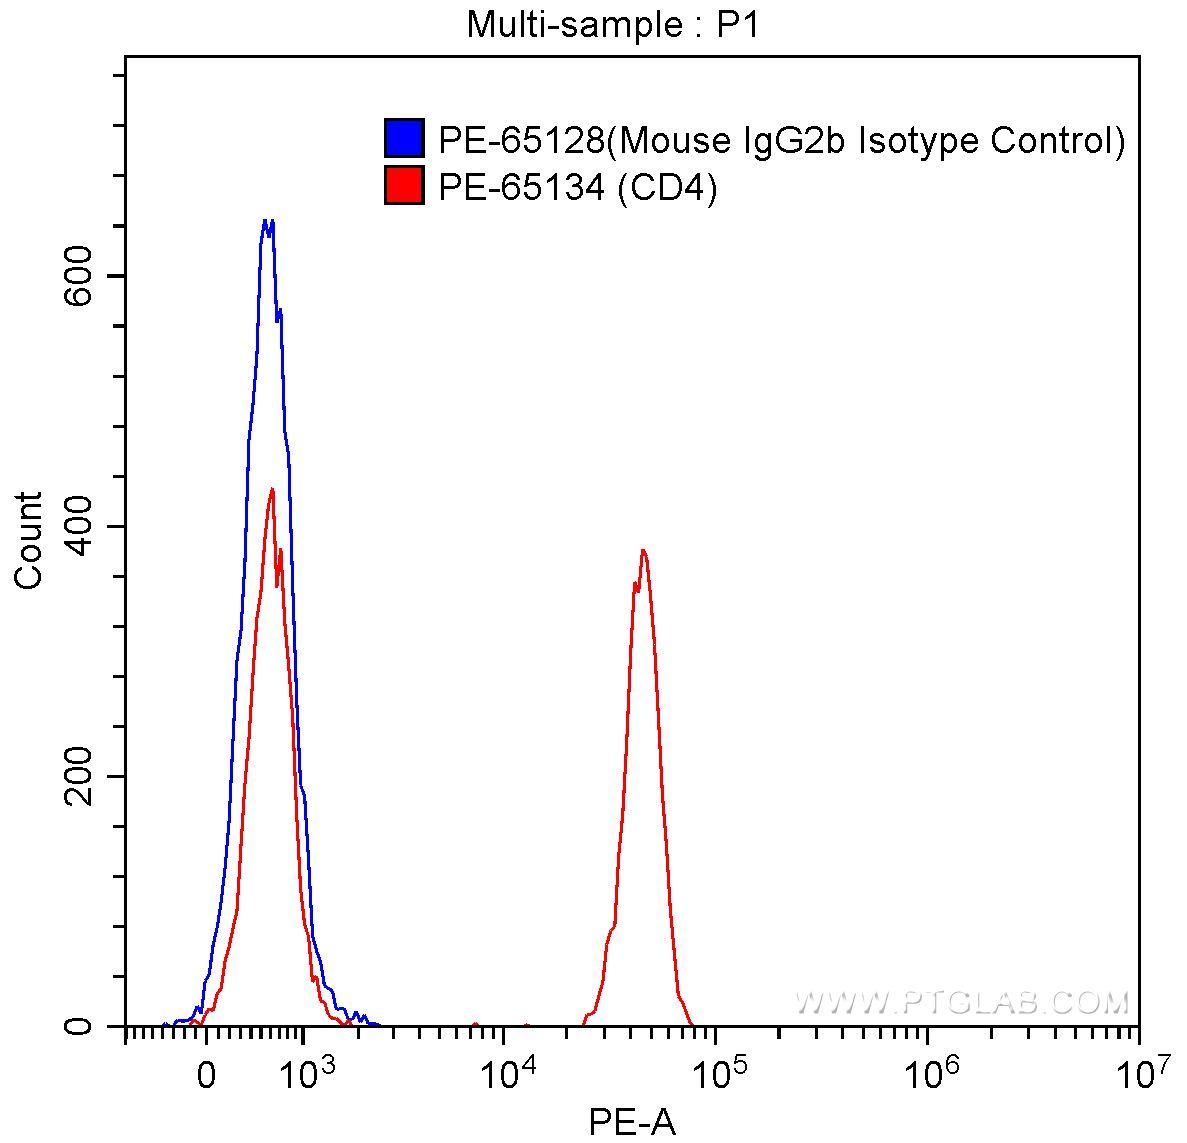 1X10^6 human peripheral blood lymphocytes were surface stained with 0.06 ug PE-anti-human CD4 (PE-65134, clone OKT4) (red) or 0.06 ug PE-mouse IgG2b isotype control (blue). Samples were not fixed.